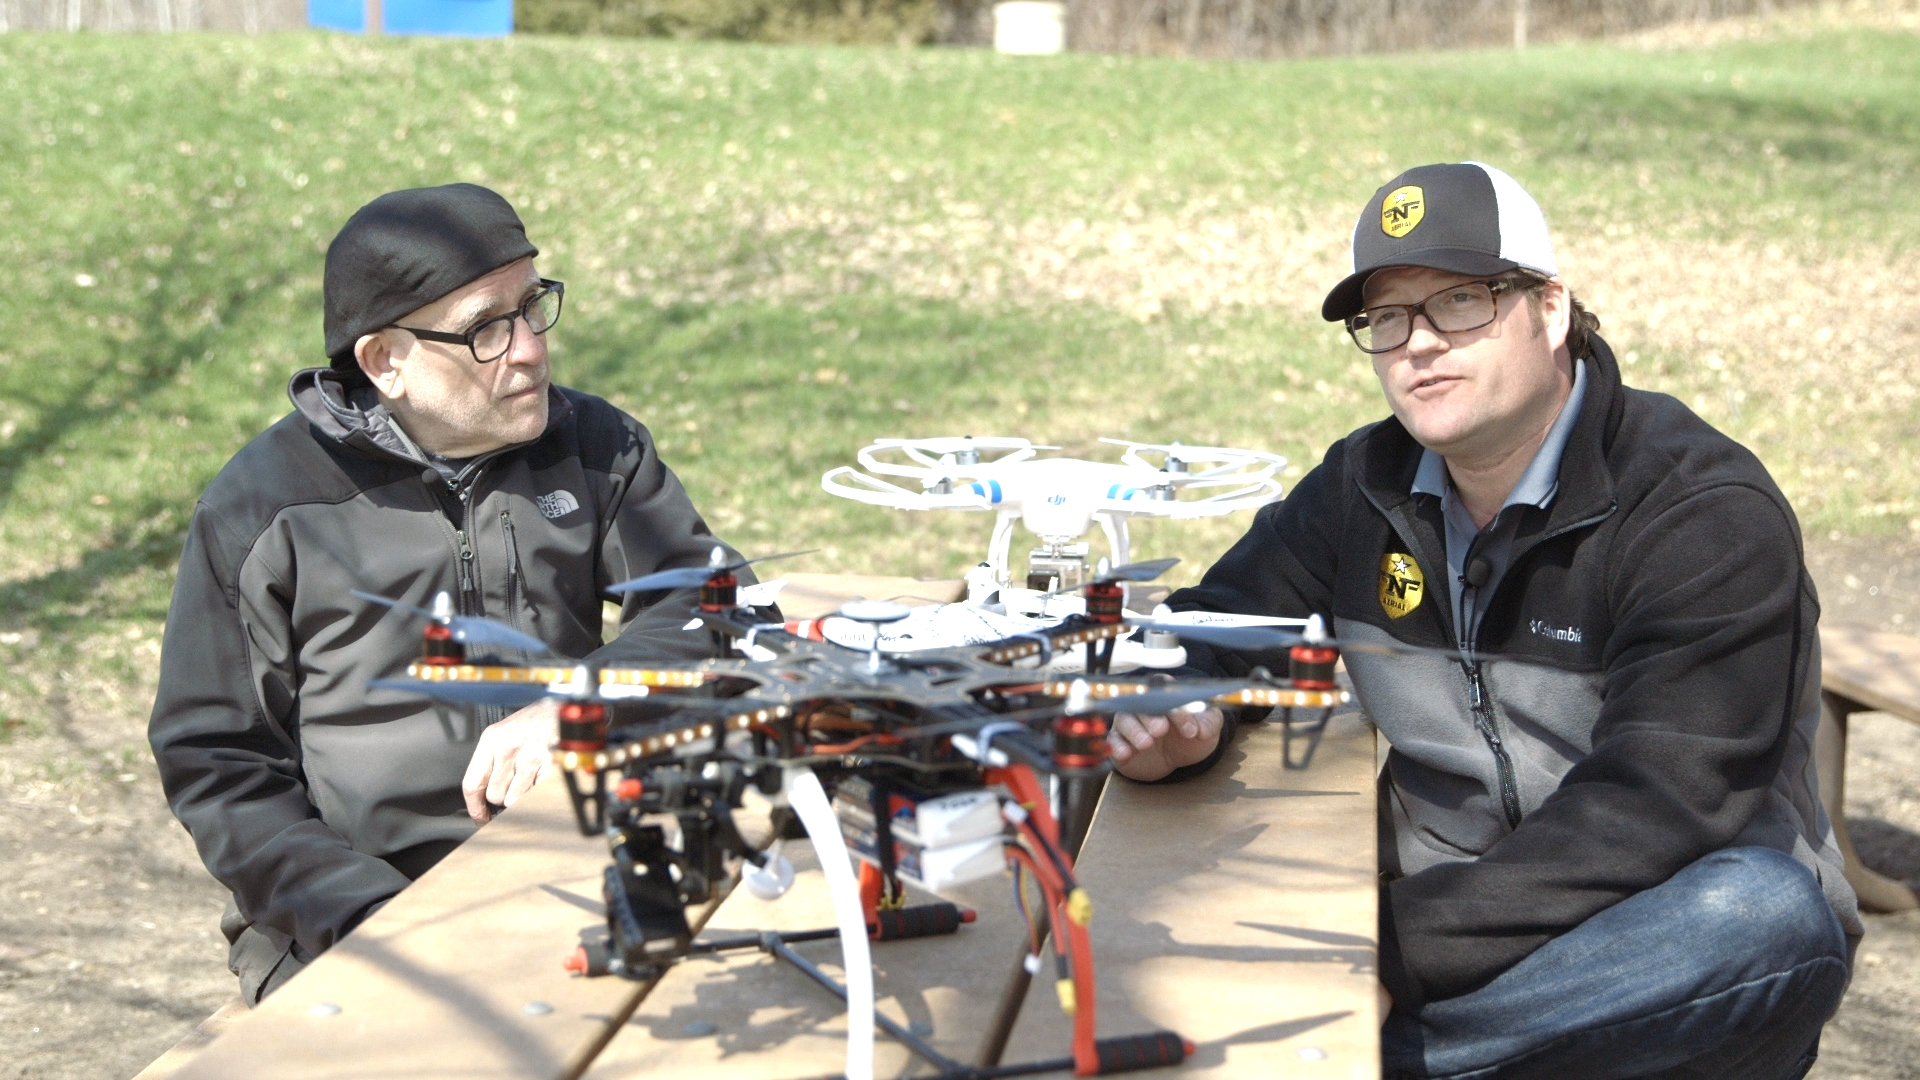 Expert Interview on Flying Drones for Aerial Photography